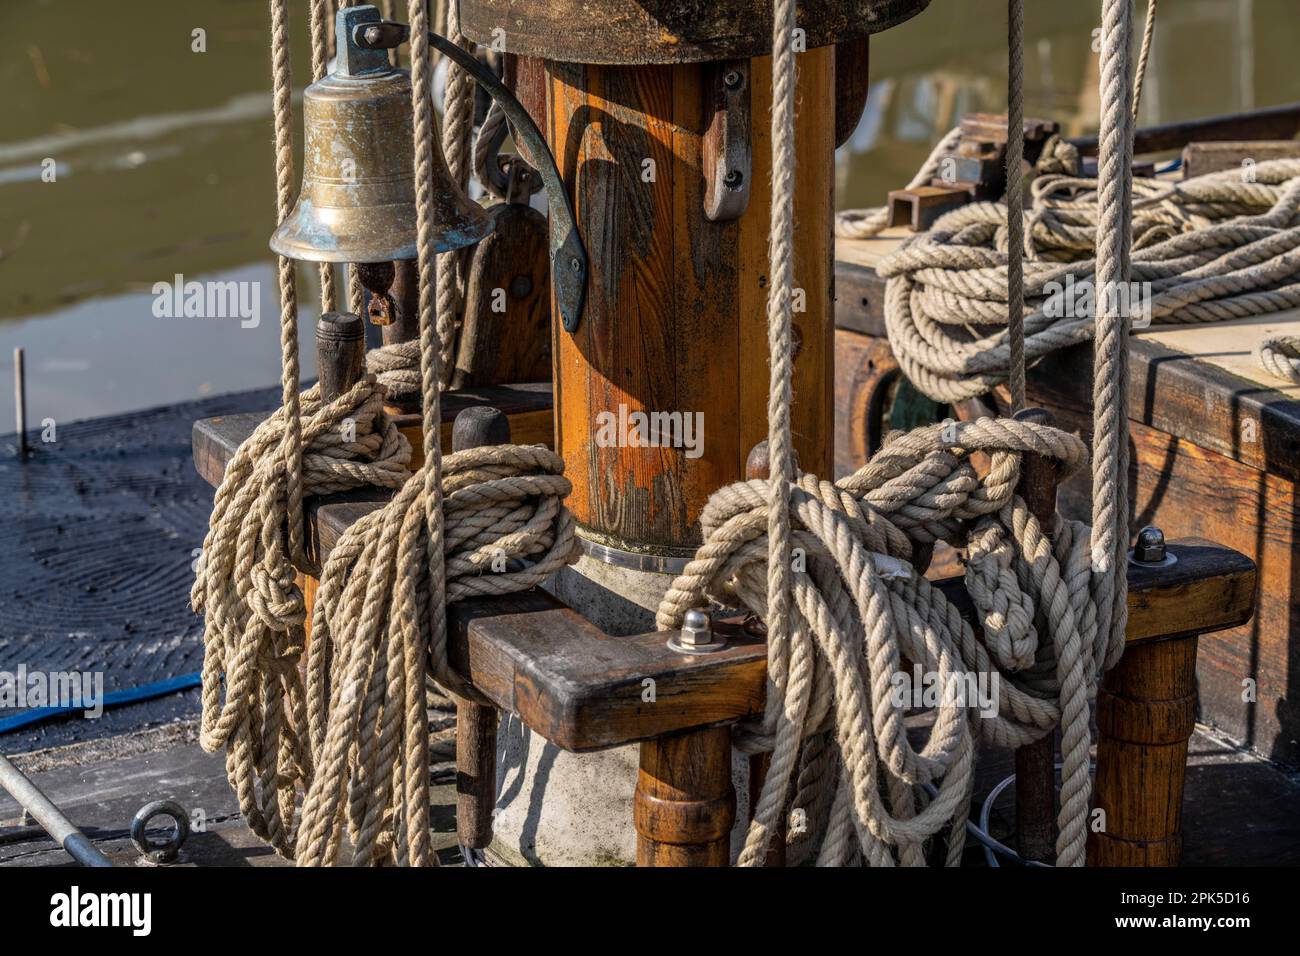 Sailboat, rigging, ropes, ropes, knots, wooden boat, sailor knots, order, disorder, maritime, in Bremerhaven Bremen, Germany Stock Photo